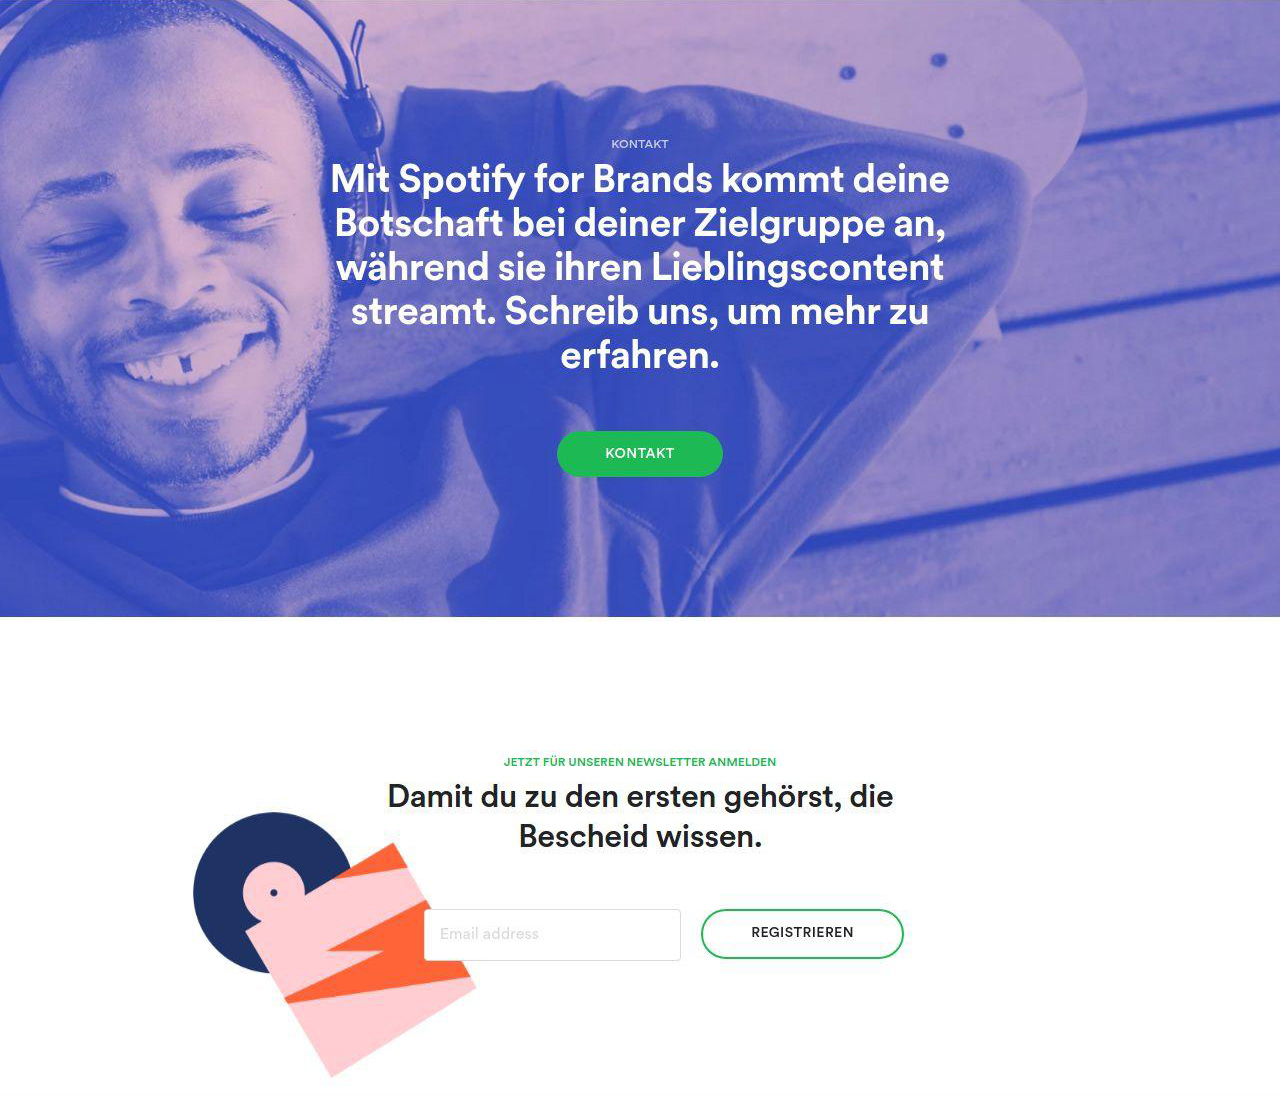 Spotify For Brands Creating a new property for Spotify across 60 locales with full customization.